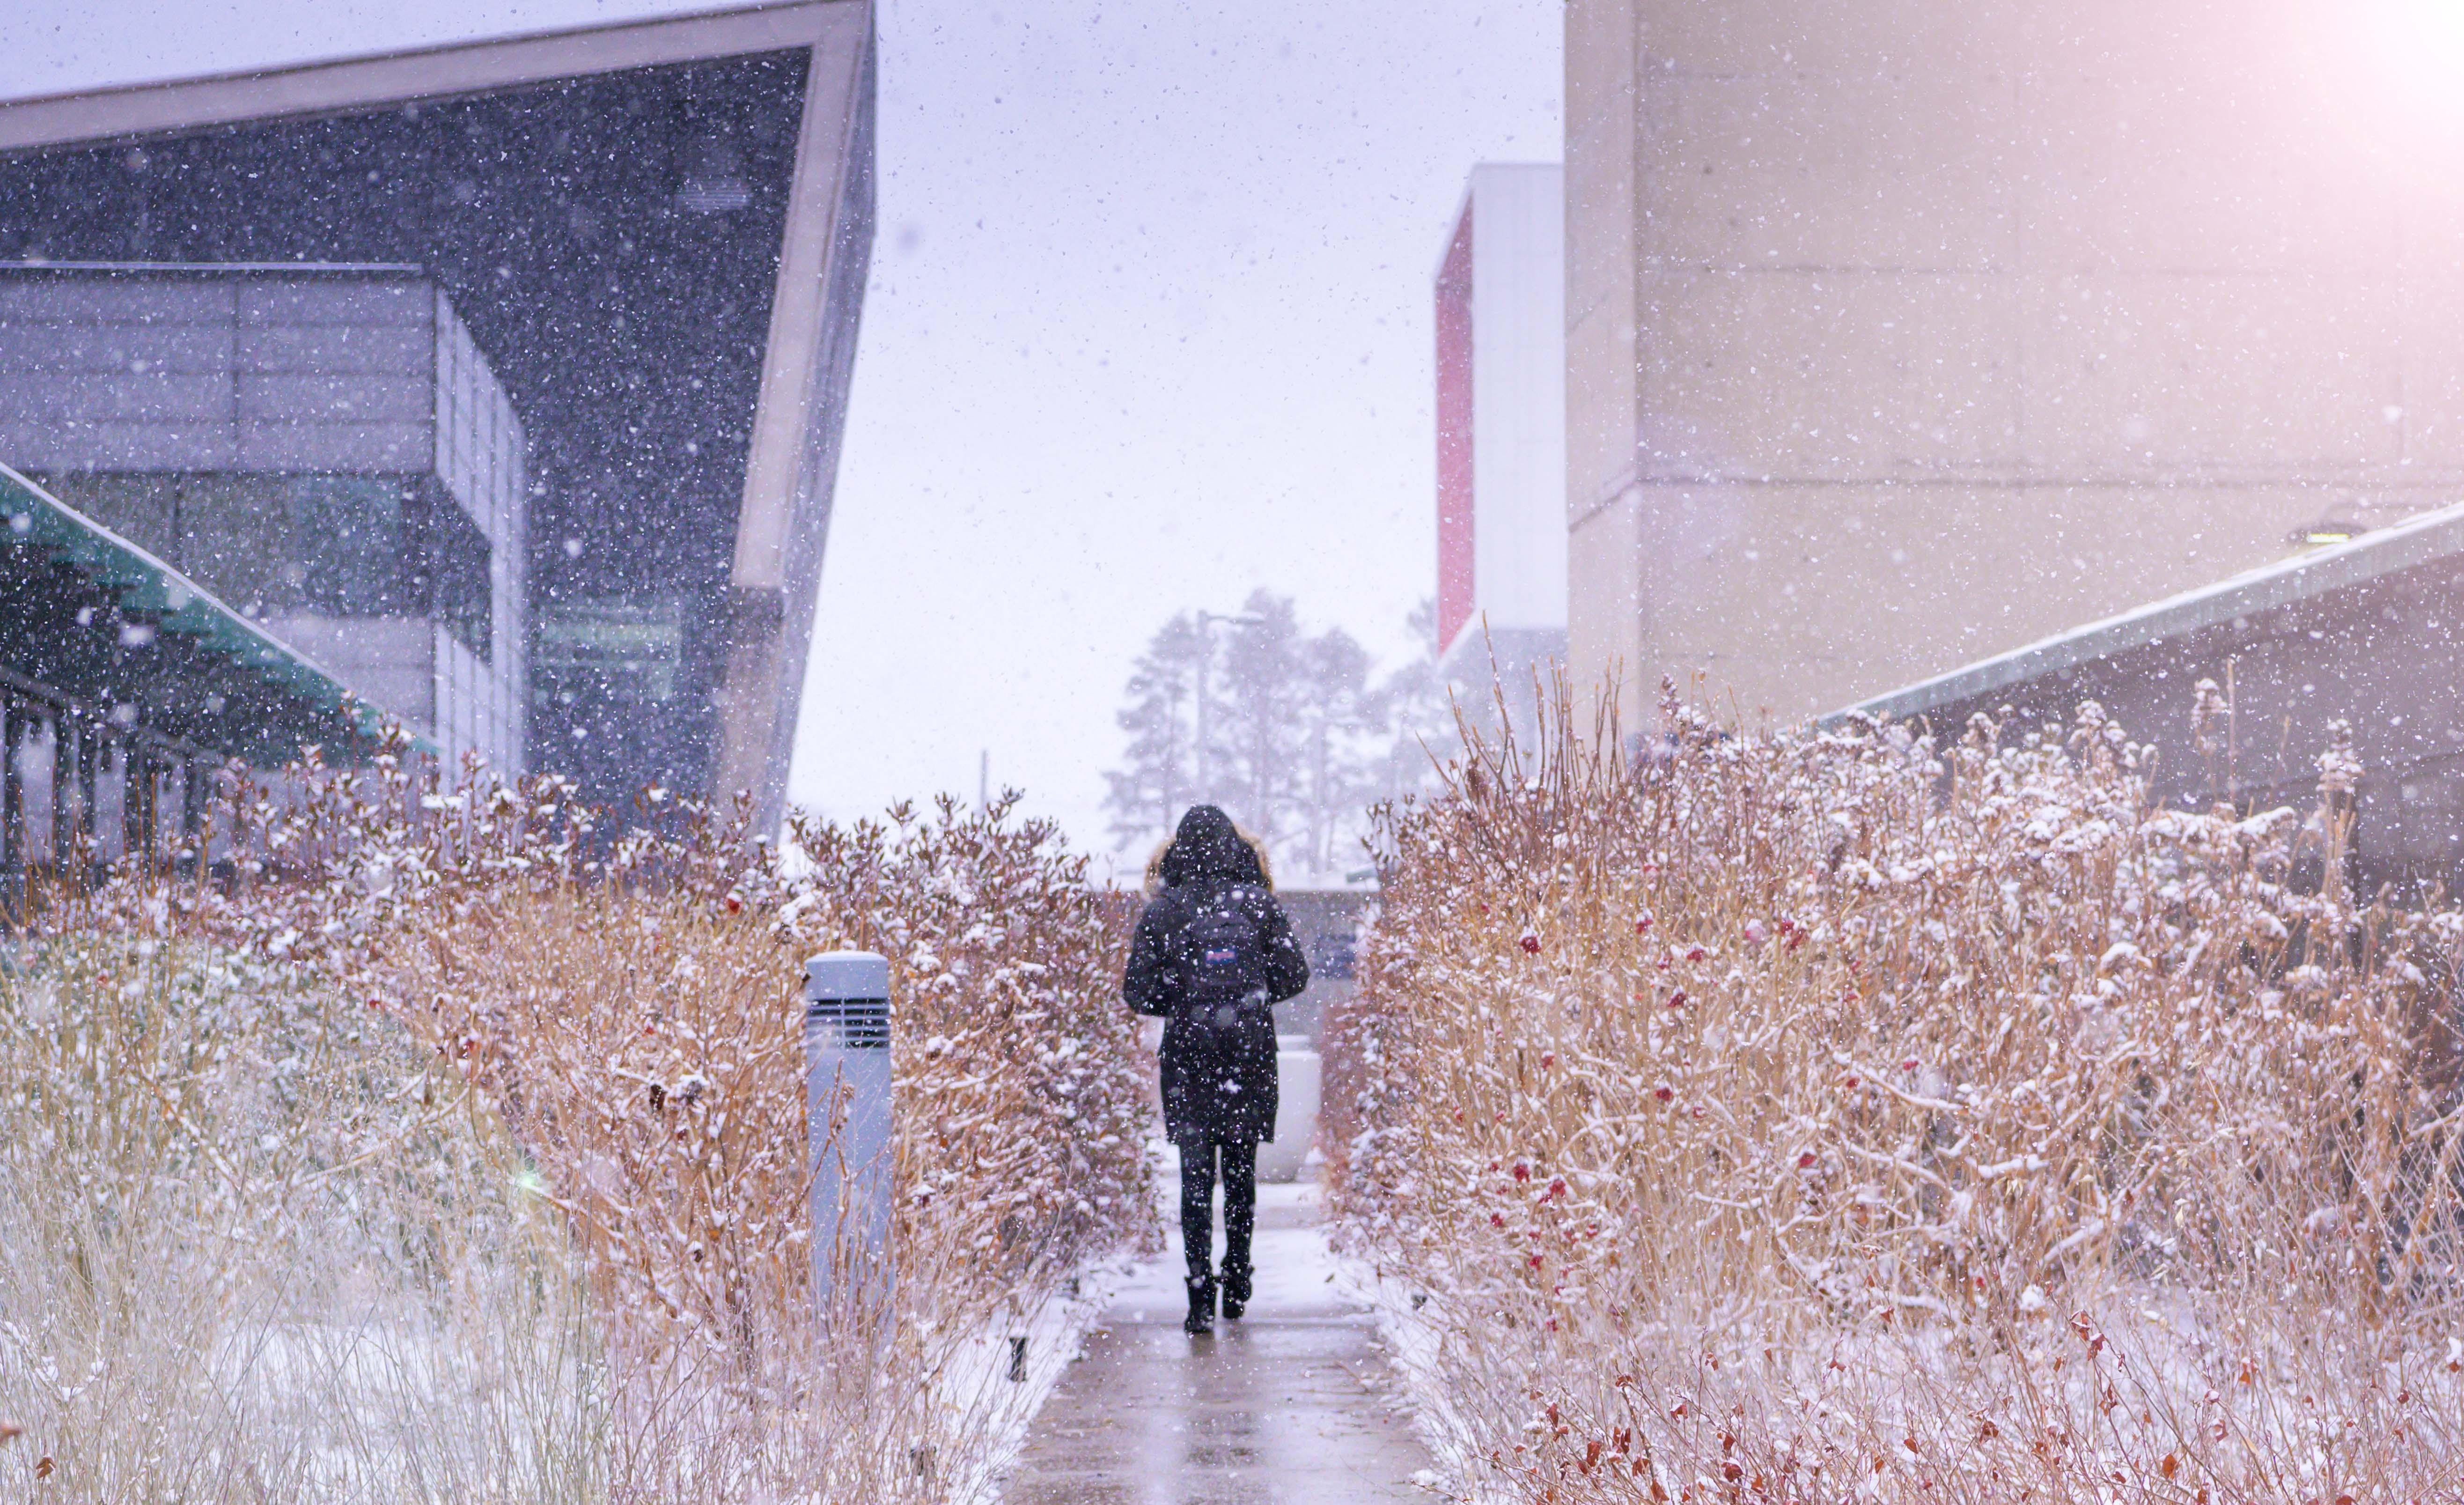 Photo of person walking through a snowy UTSC campus.